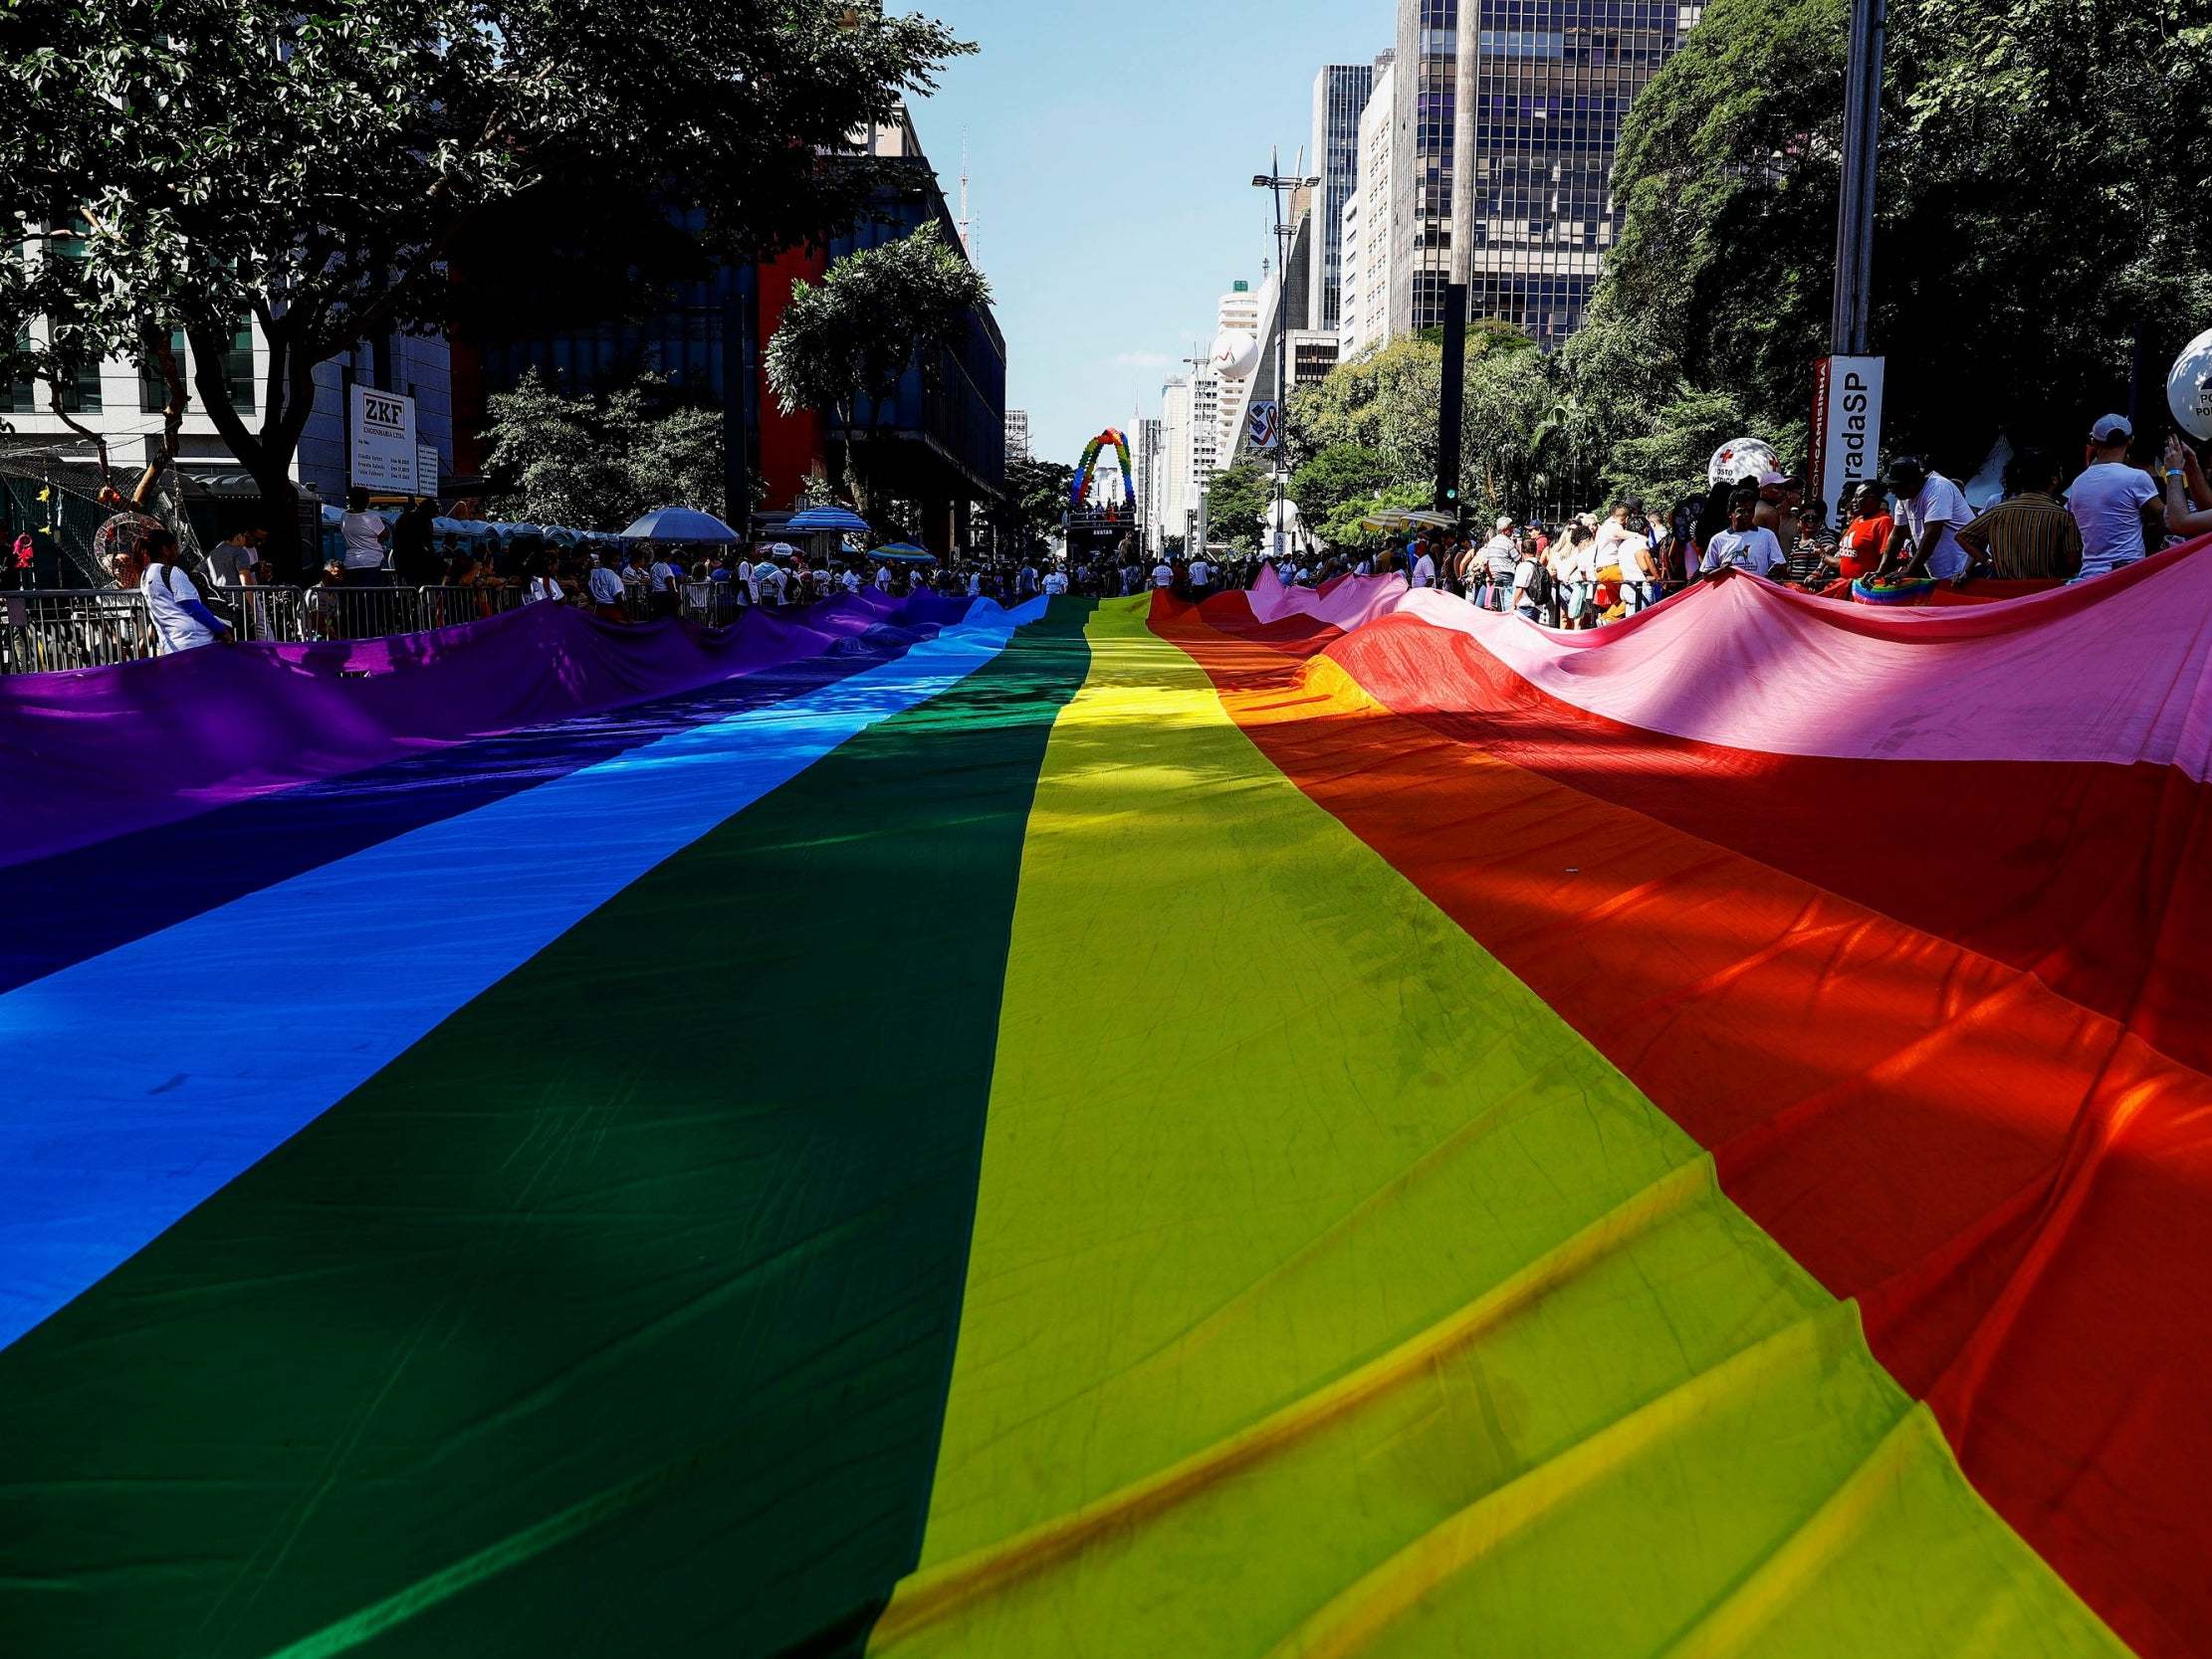 Brazil’s LGBT+ community are increasingly taking to the streets to defend their rights and dignity amid a backlash on progress from their own leader